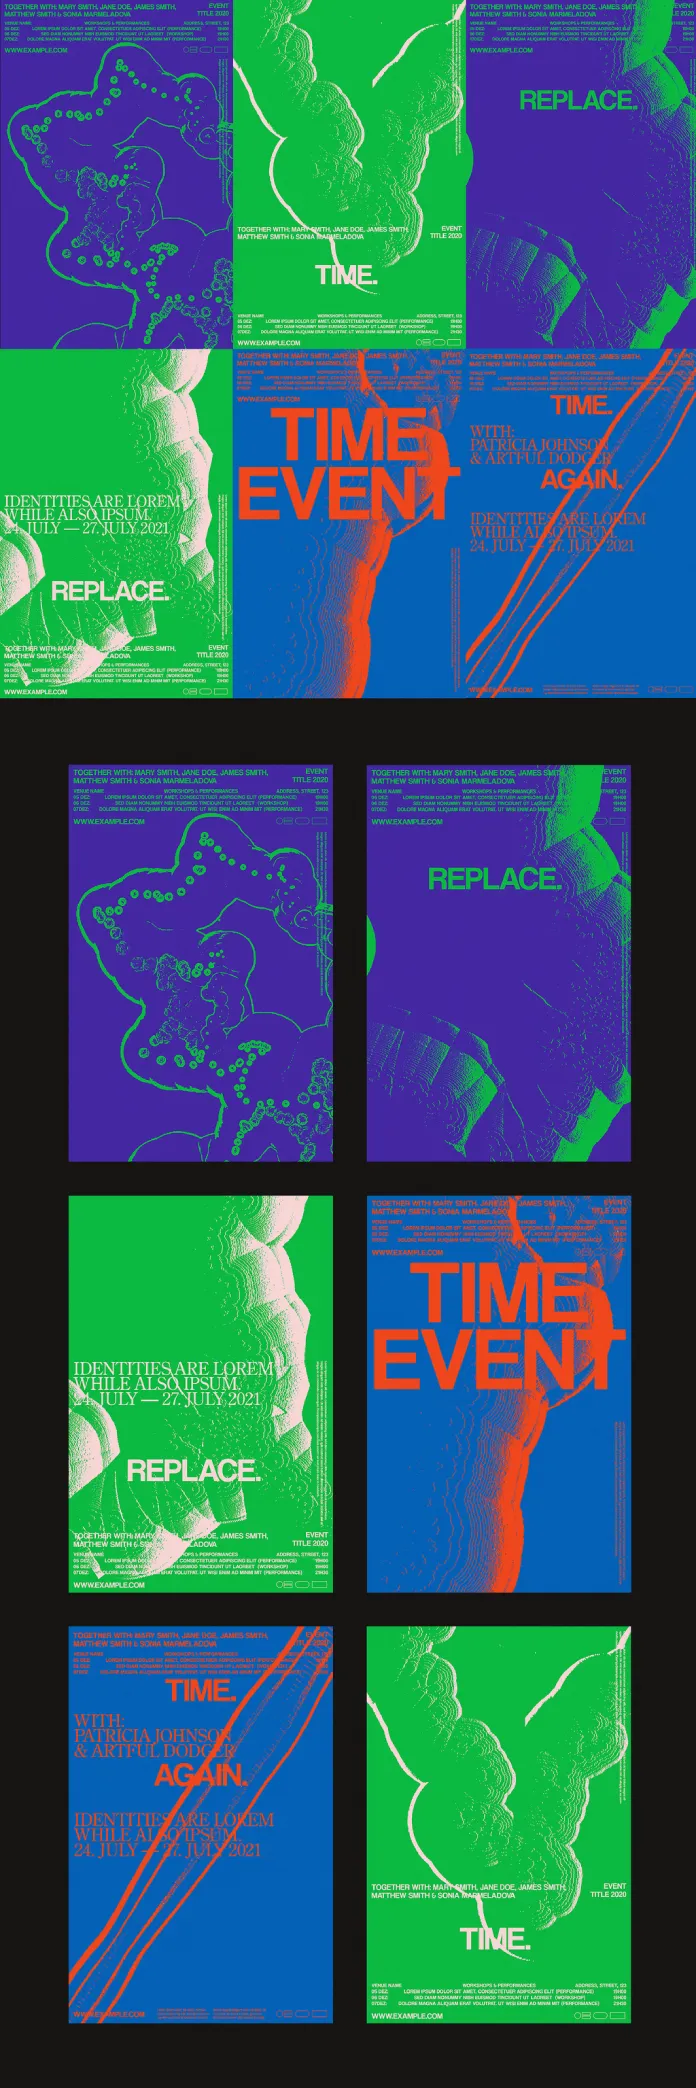 Colorful Cinema Poster Campaign Templates by The Royal Studio for Adobe Illustrator